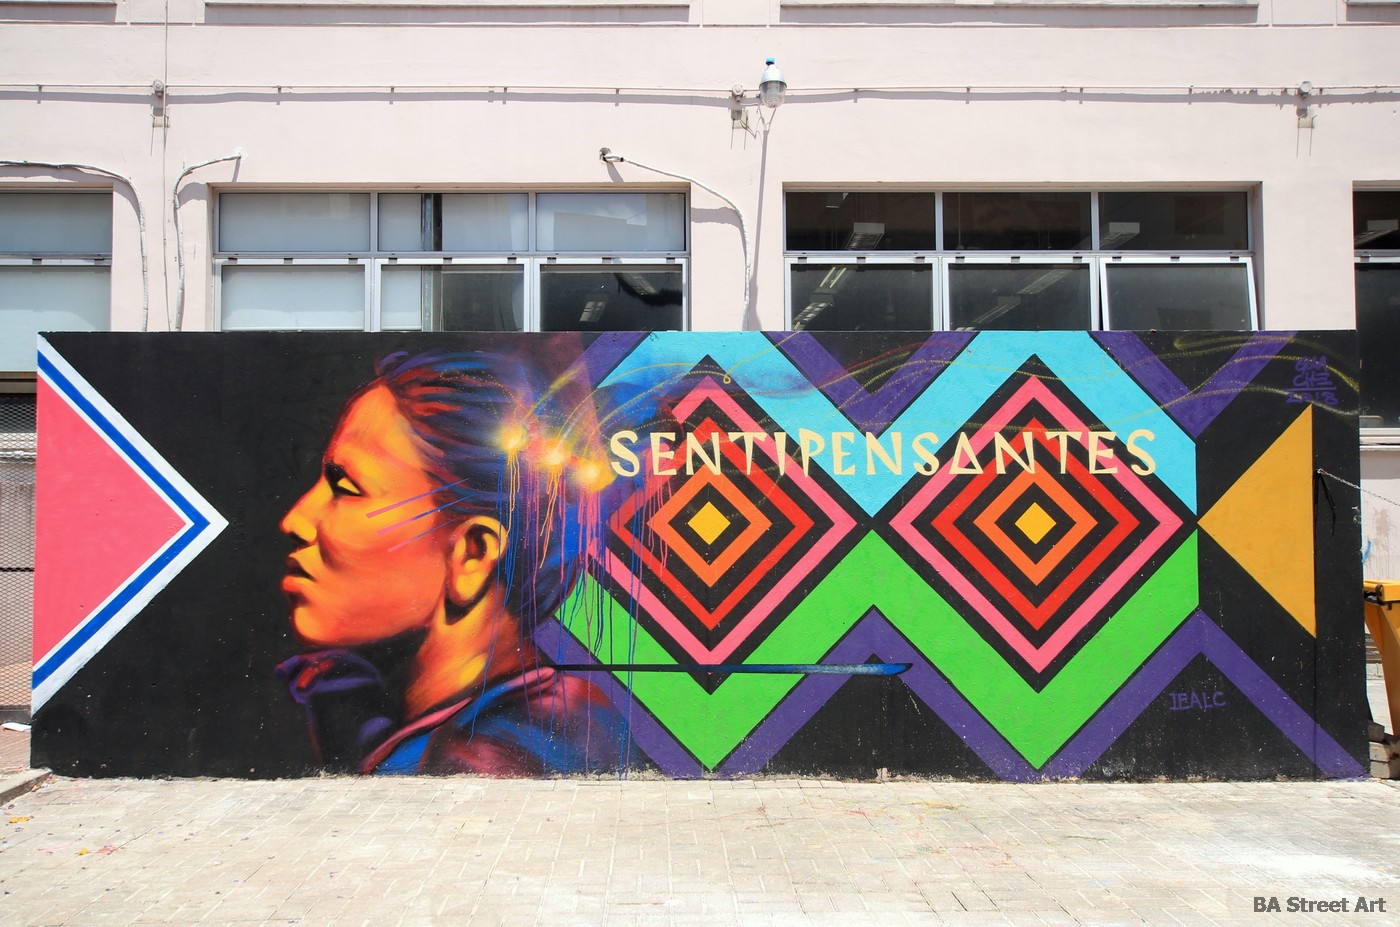 Guache paints new mural in Buenos Aires